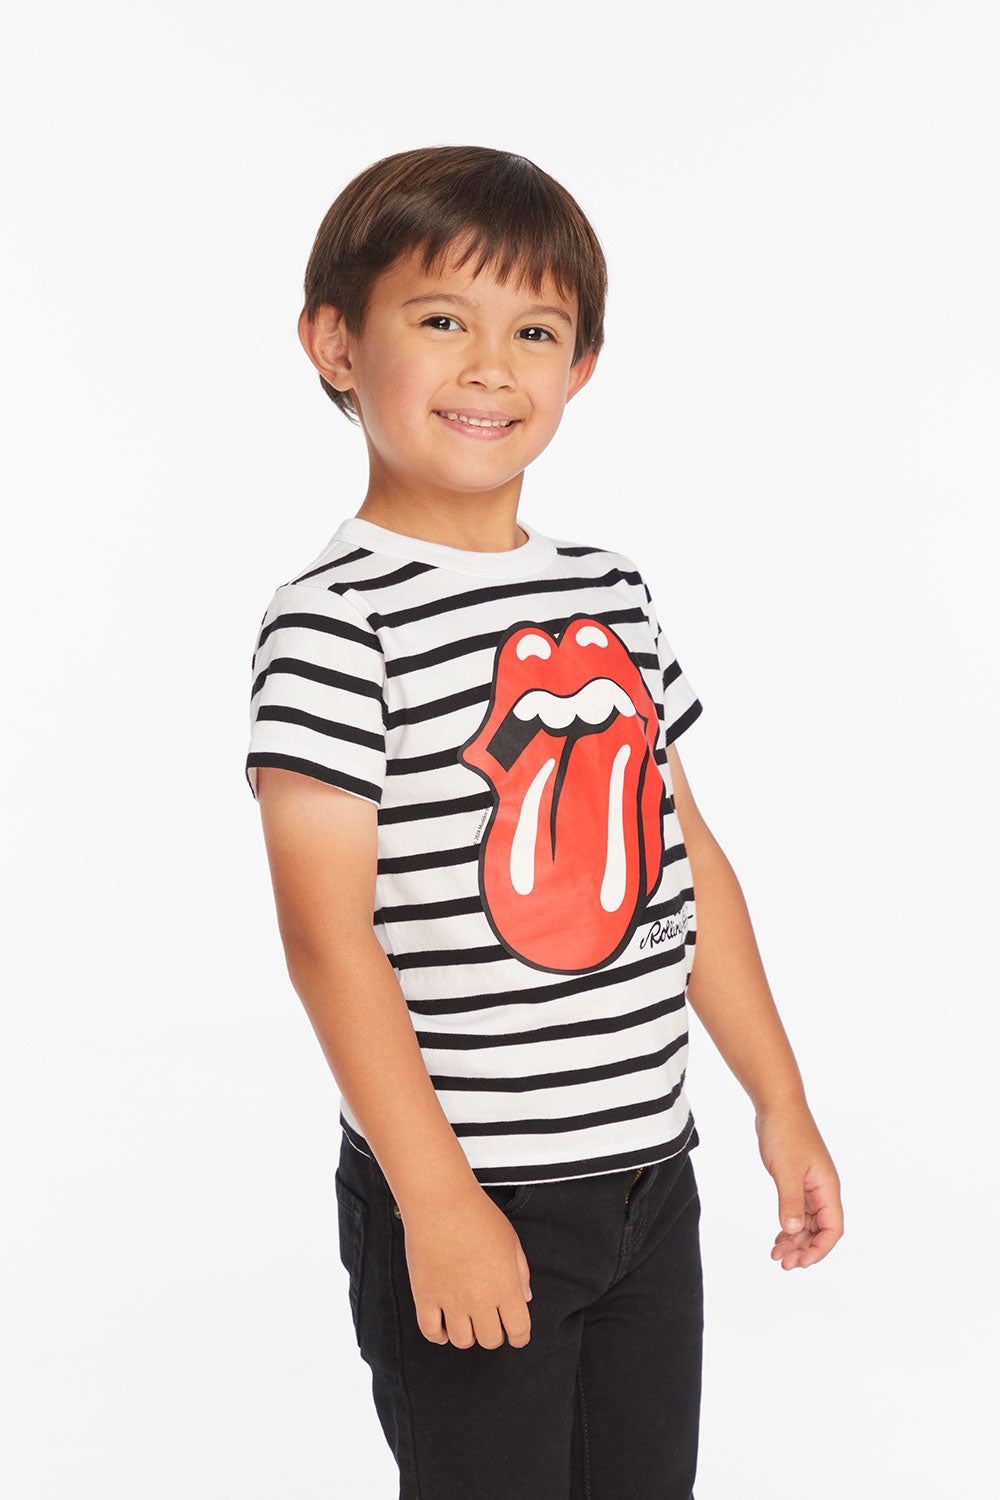 Rolling Stones Tongue Logo Boys Tee Boys chaserbrand